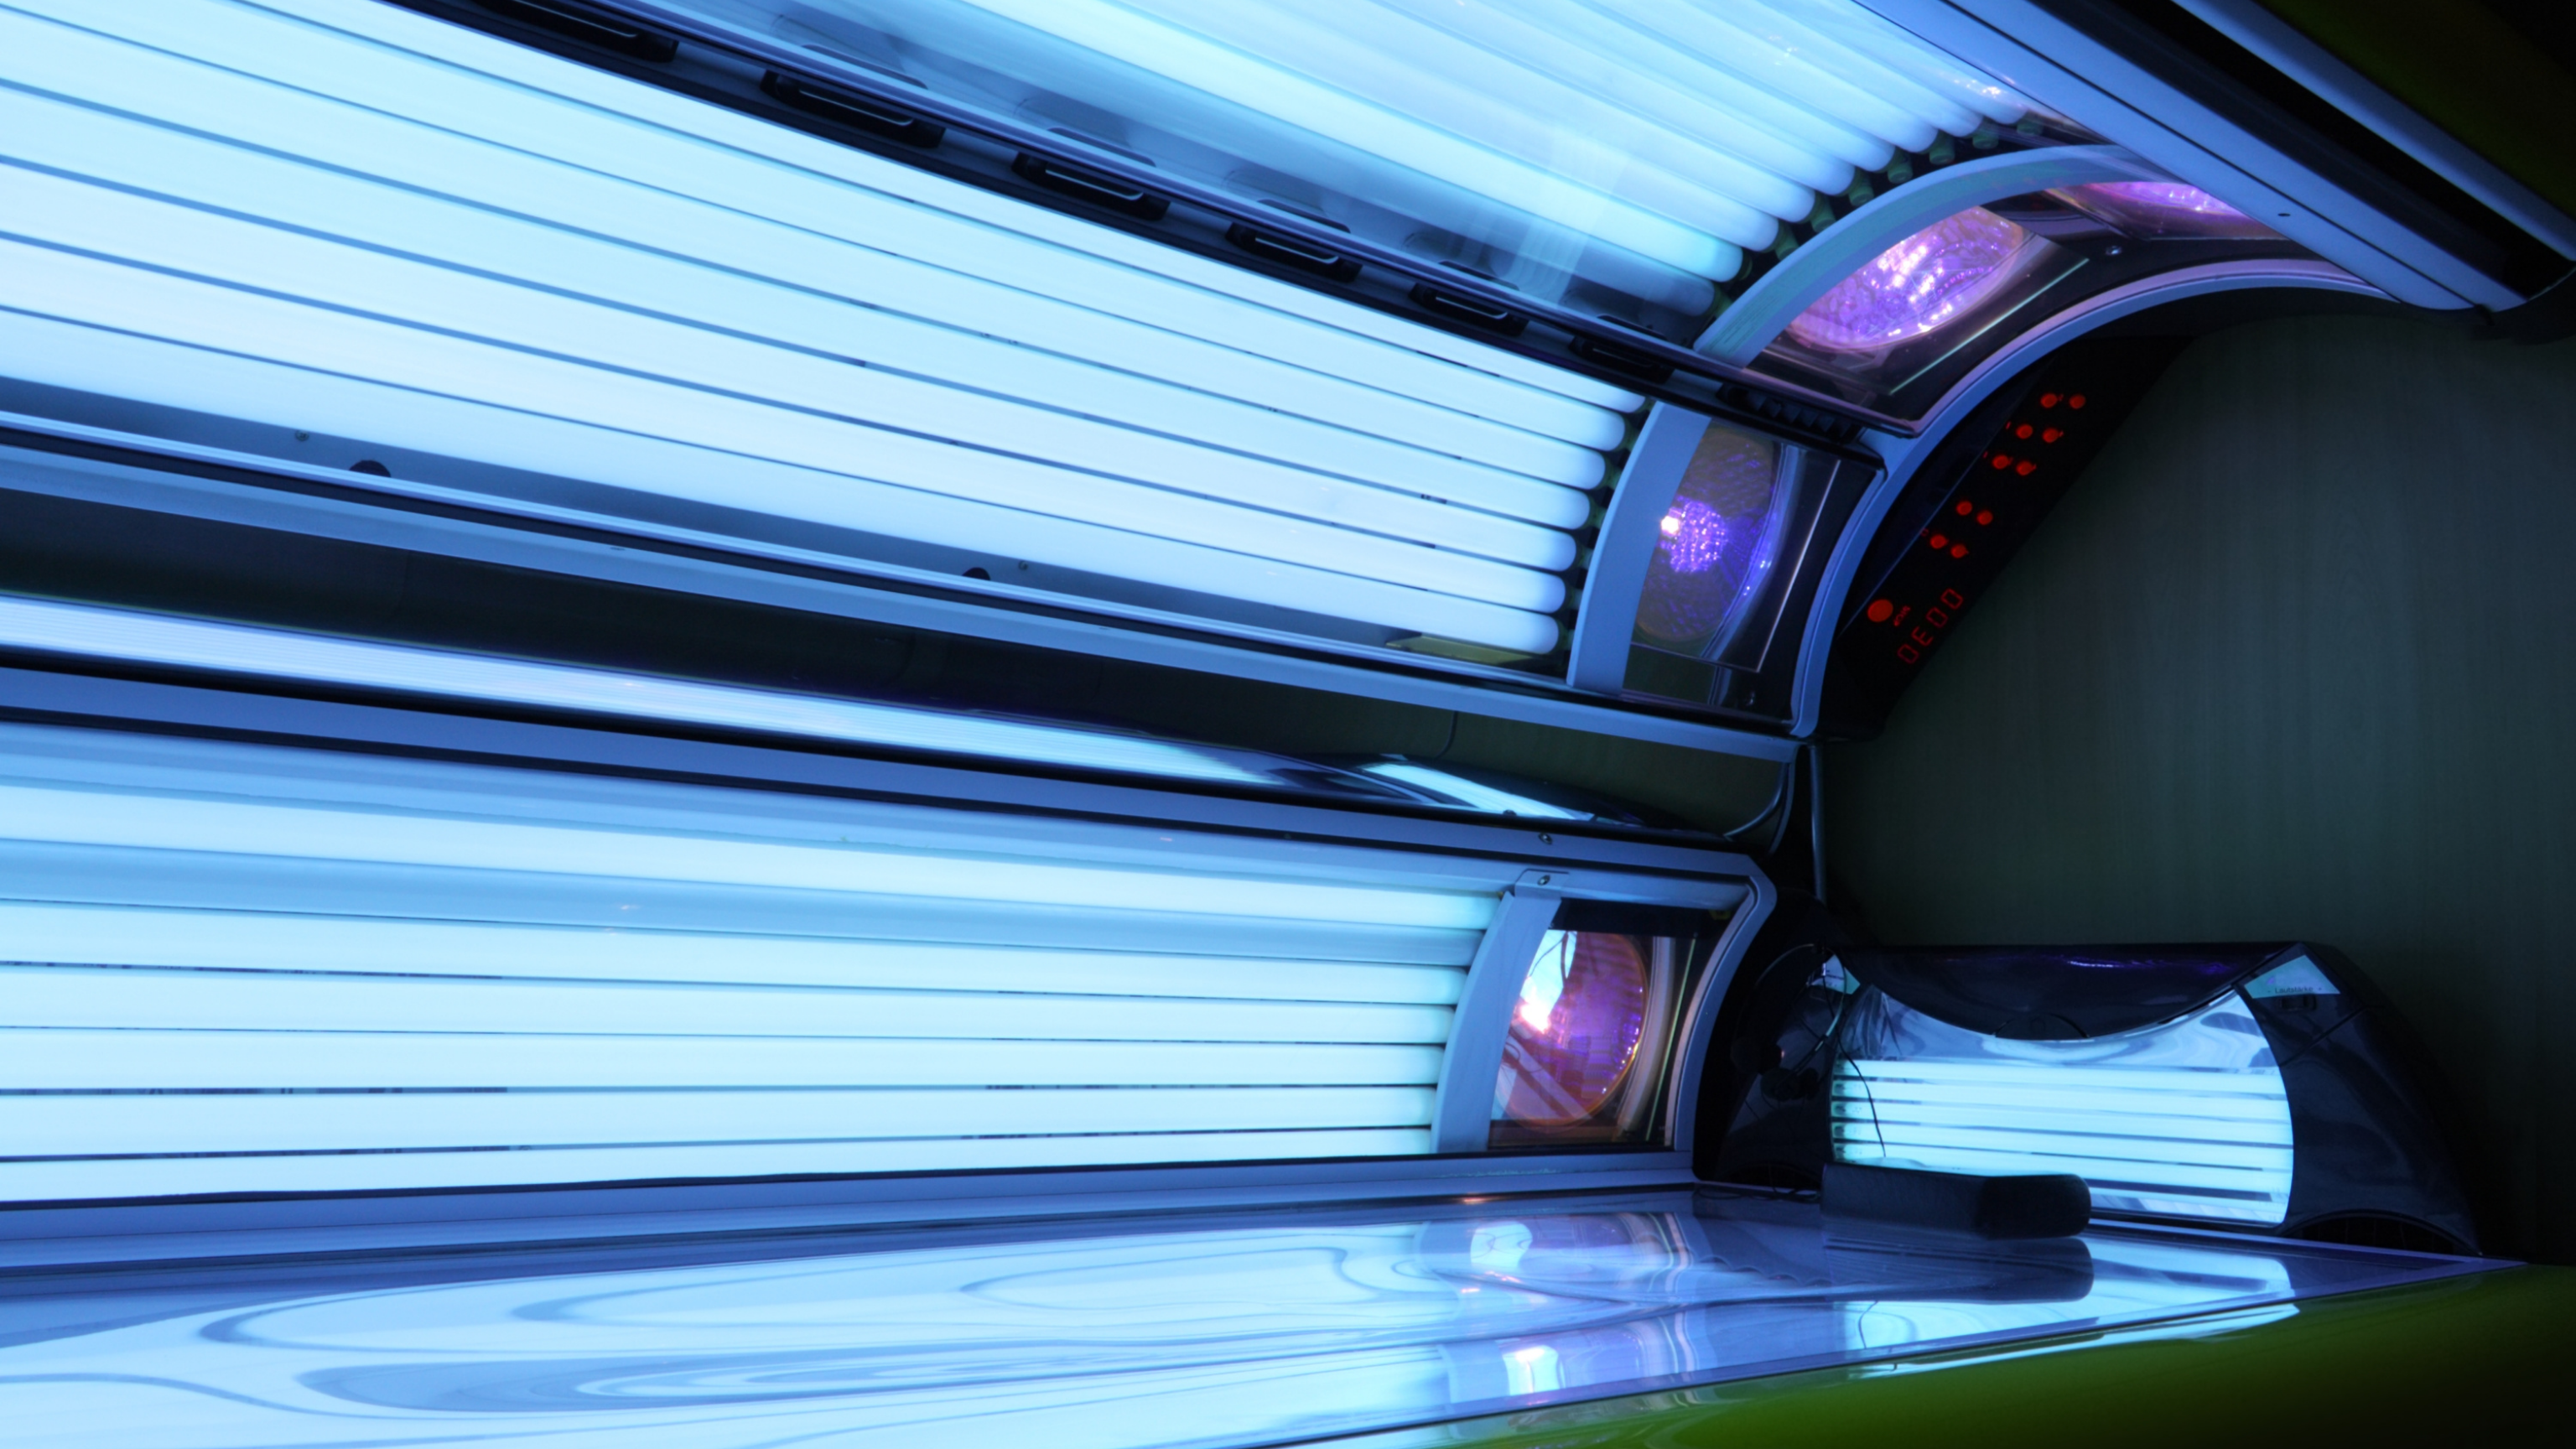 tanning beds can cause skin cancer